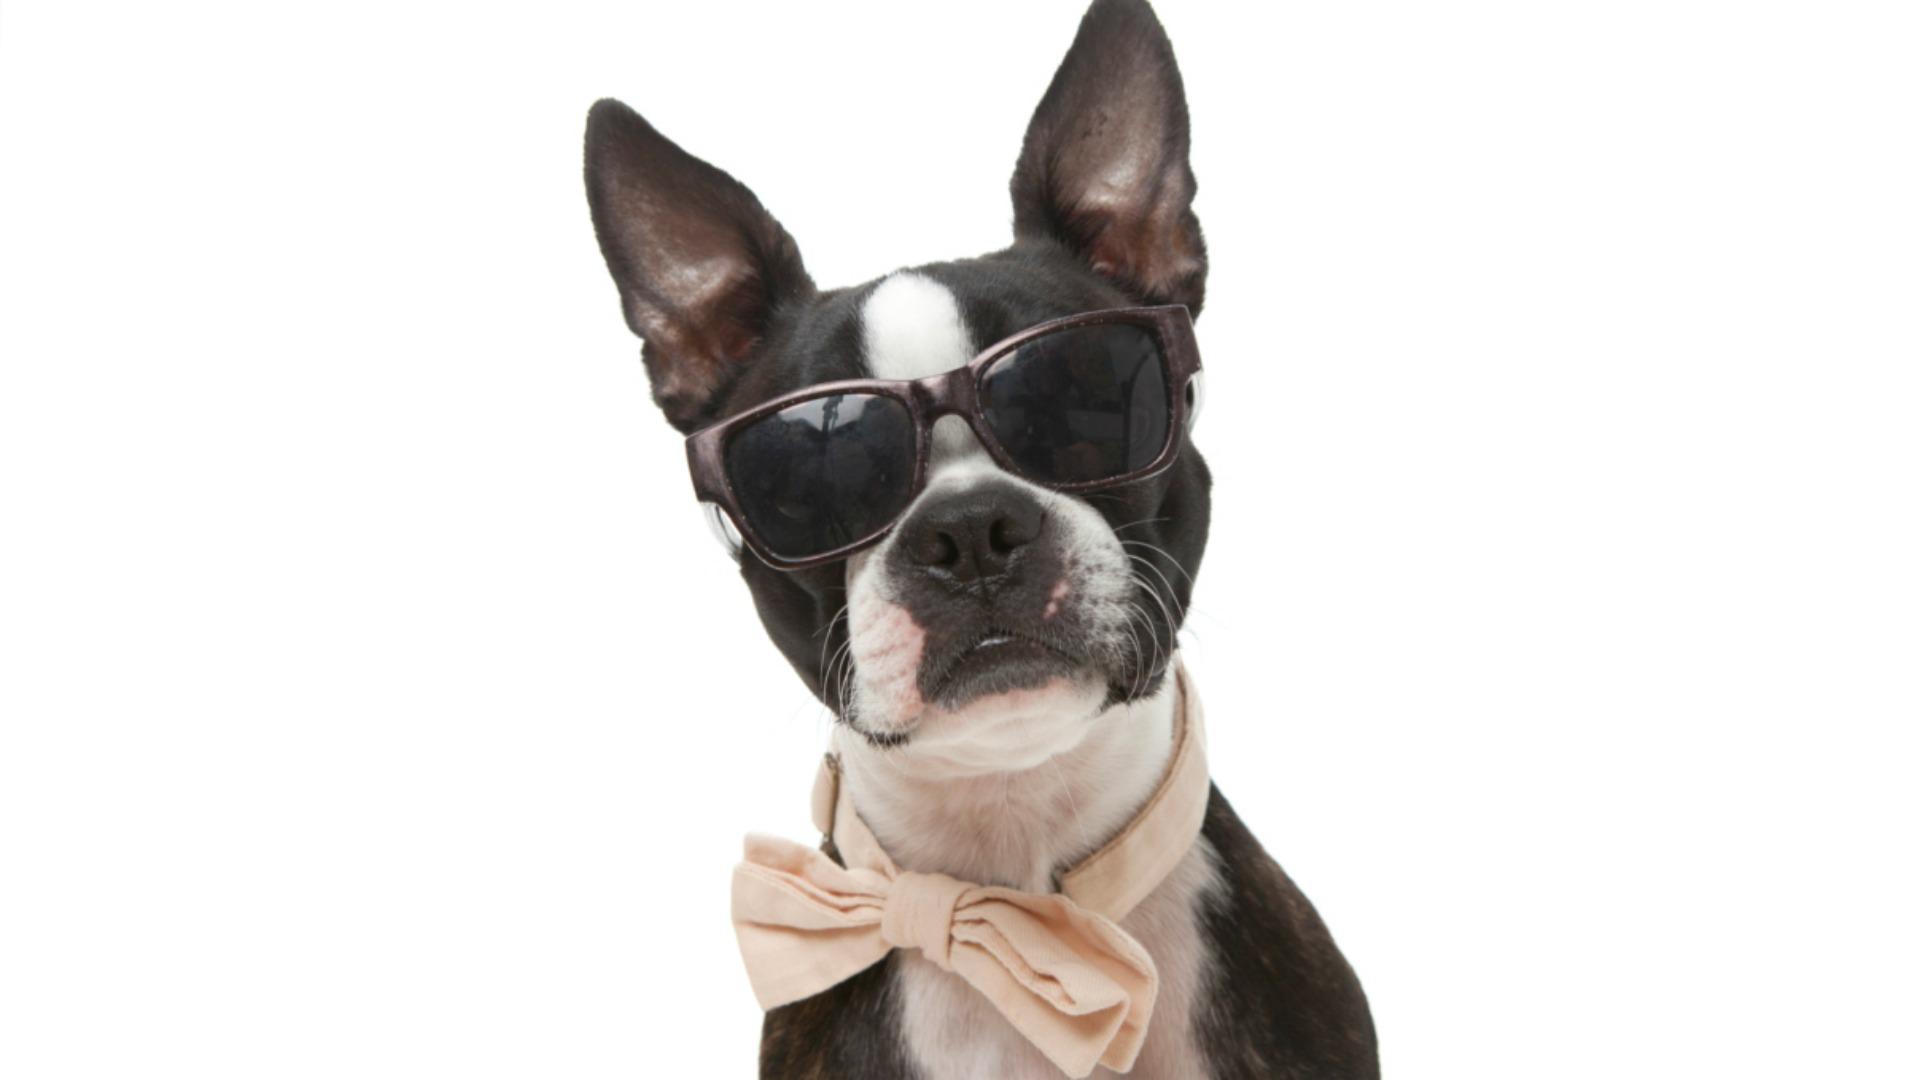 10 Perfect pictures of dogs wearing sunglasses